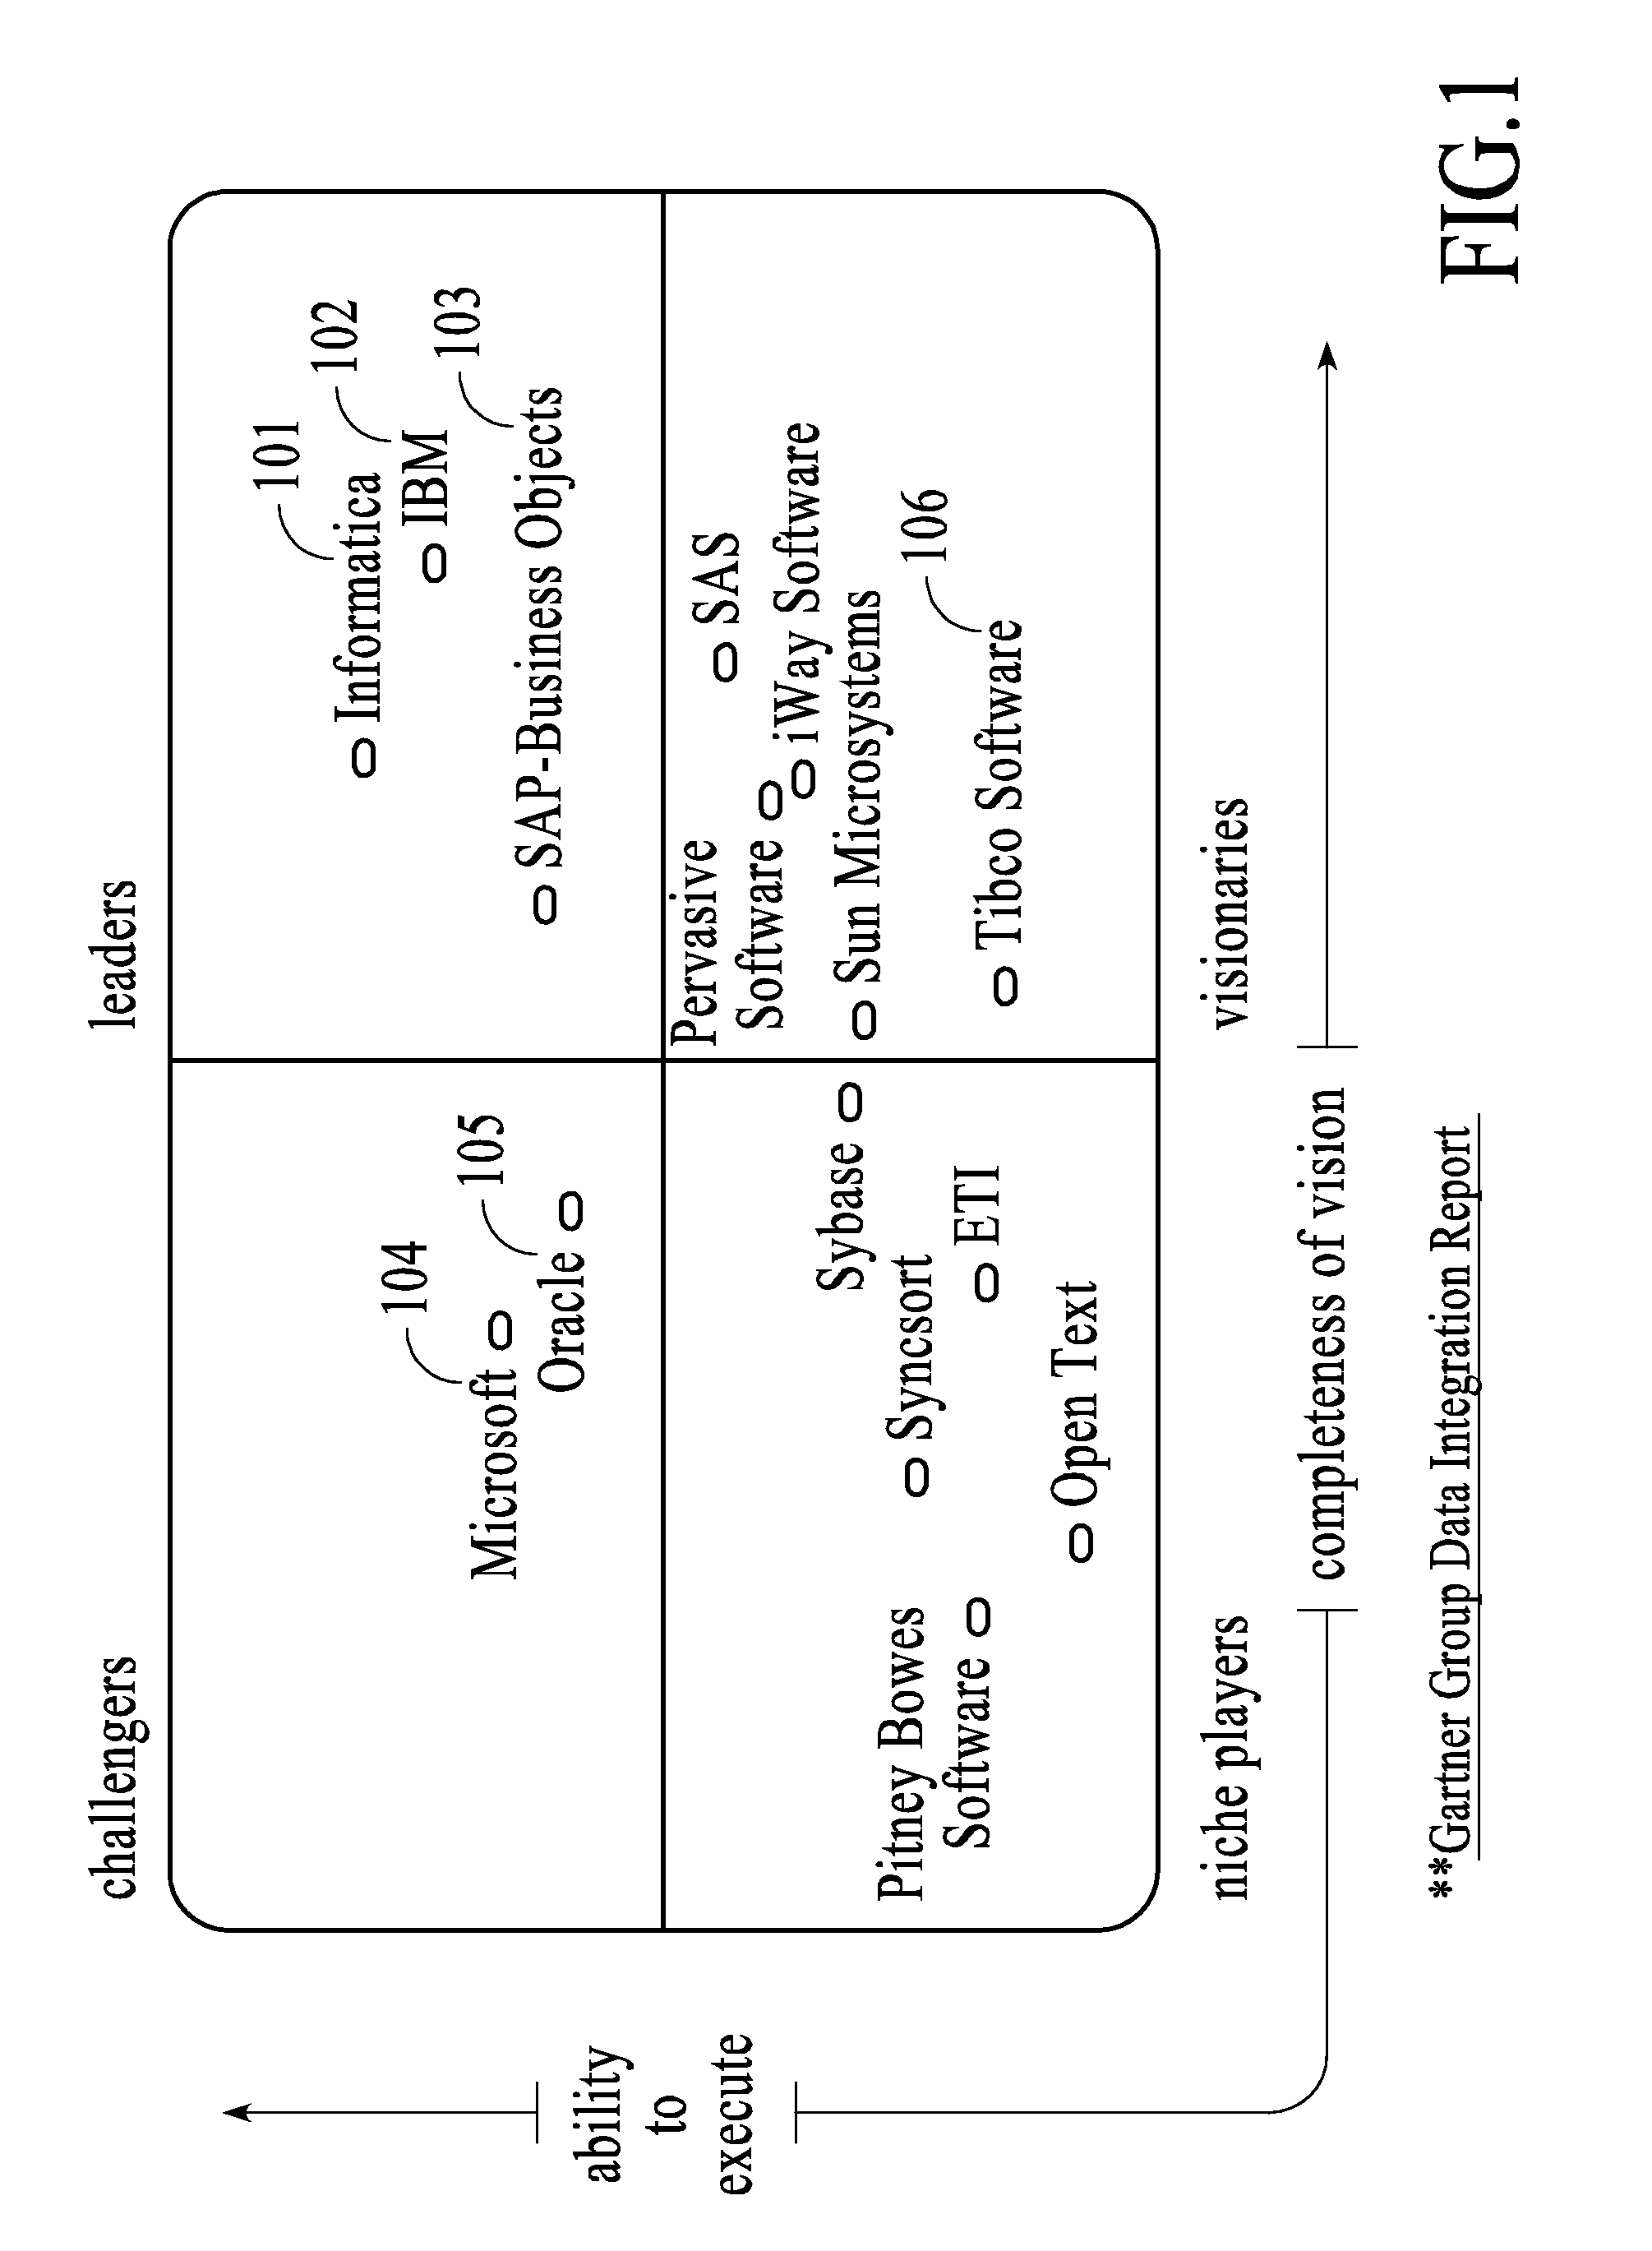 System, multi-tier interface and methods for management of operational structured data